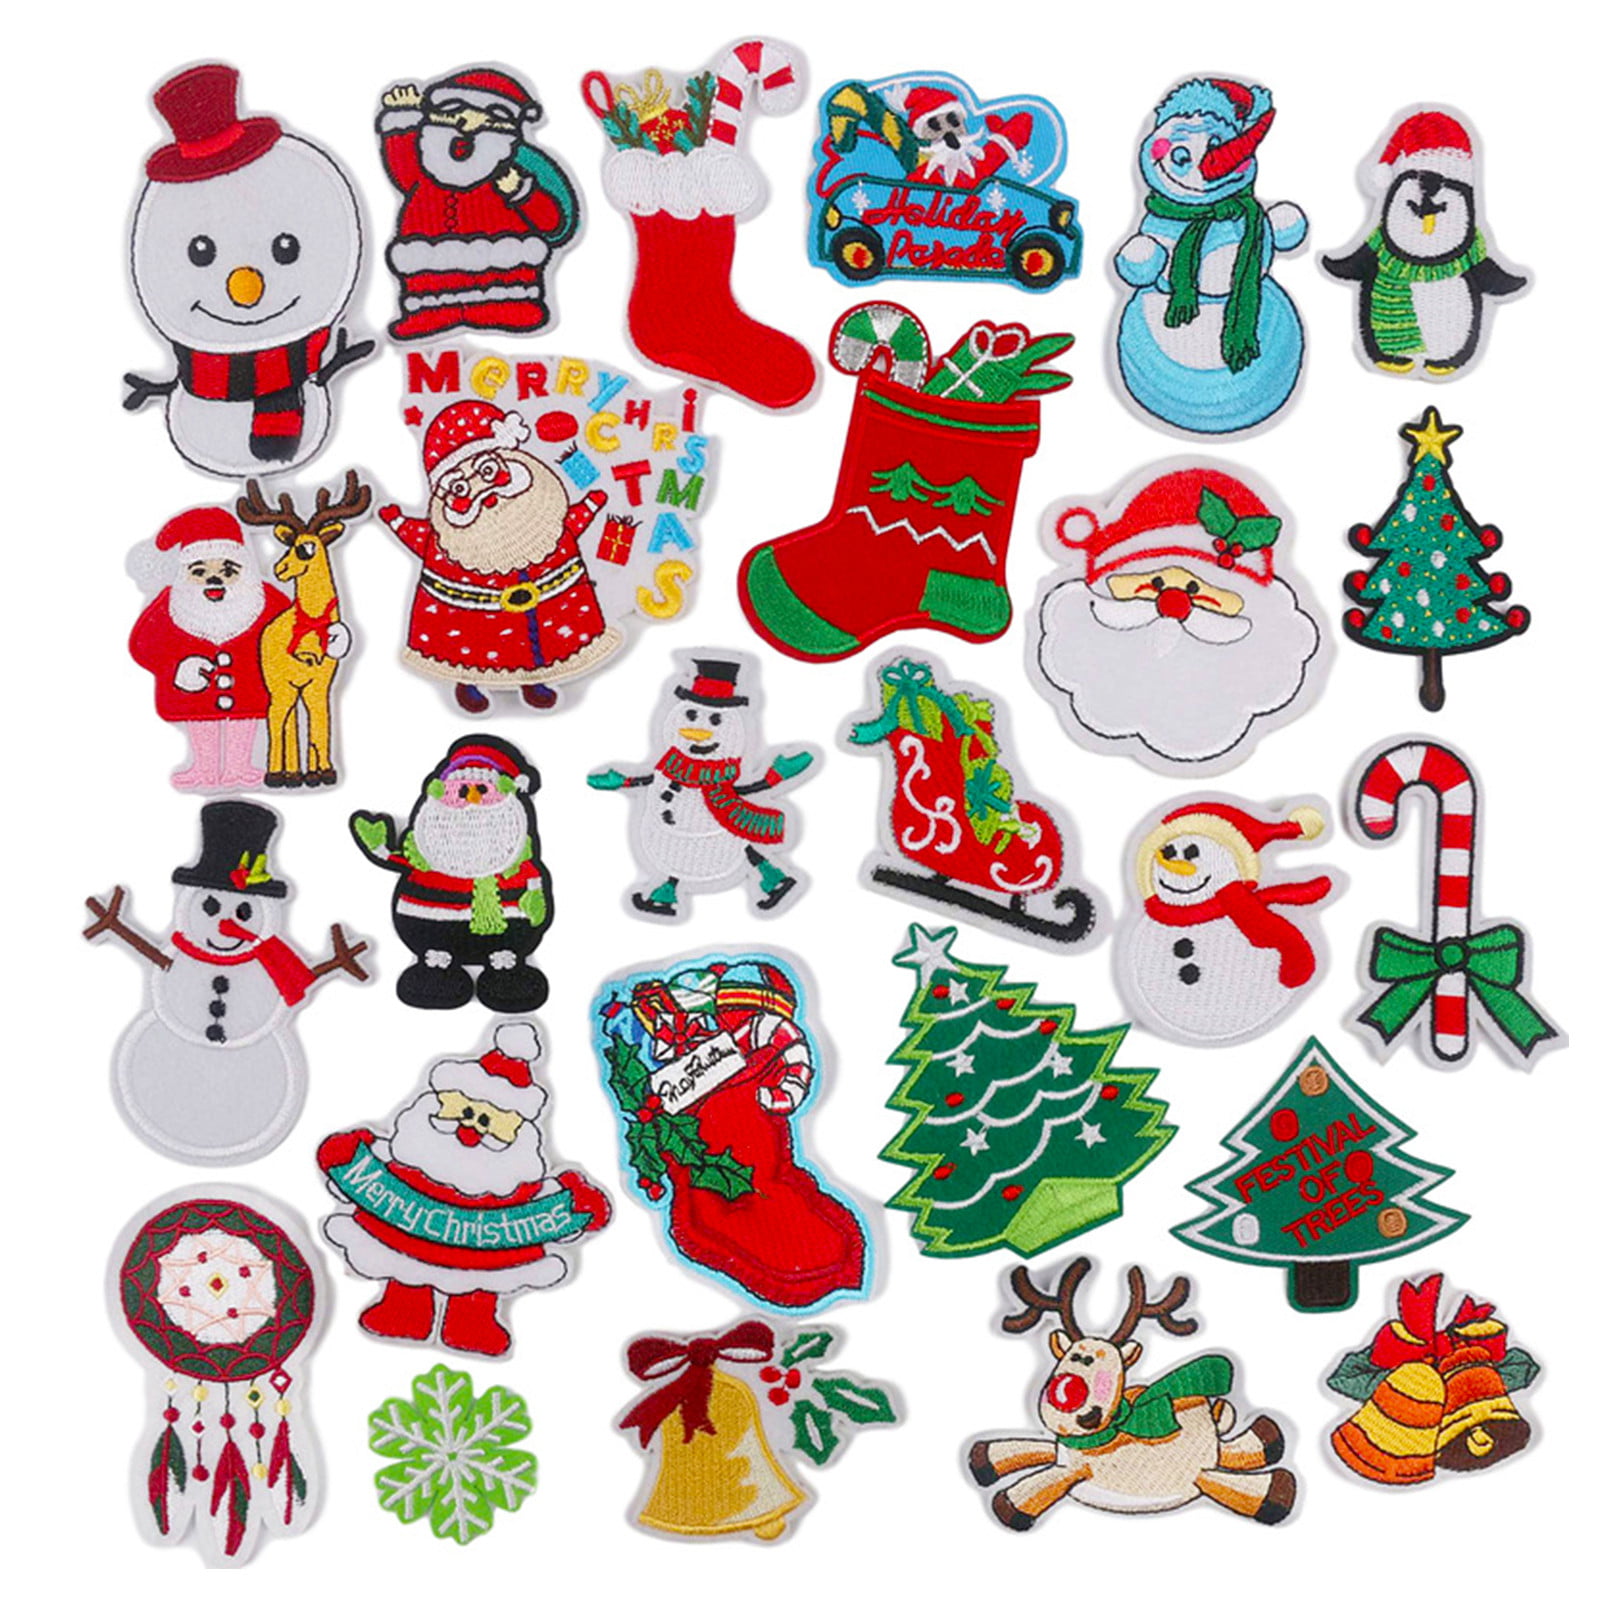 SUPVOX 18pcs Iron on Patches Christmas Theme Embroidered Patches Applique Motif Sew On Patches for Christmas Costume Decoration 